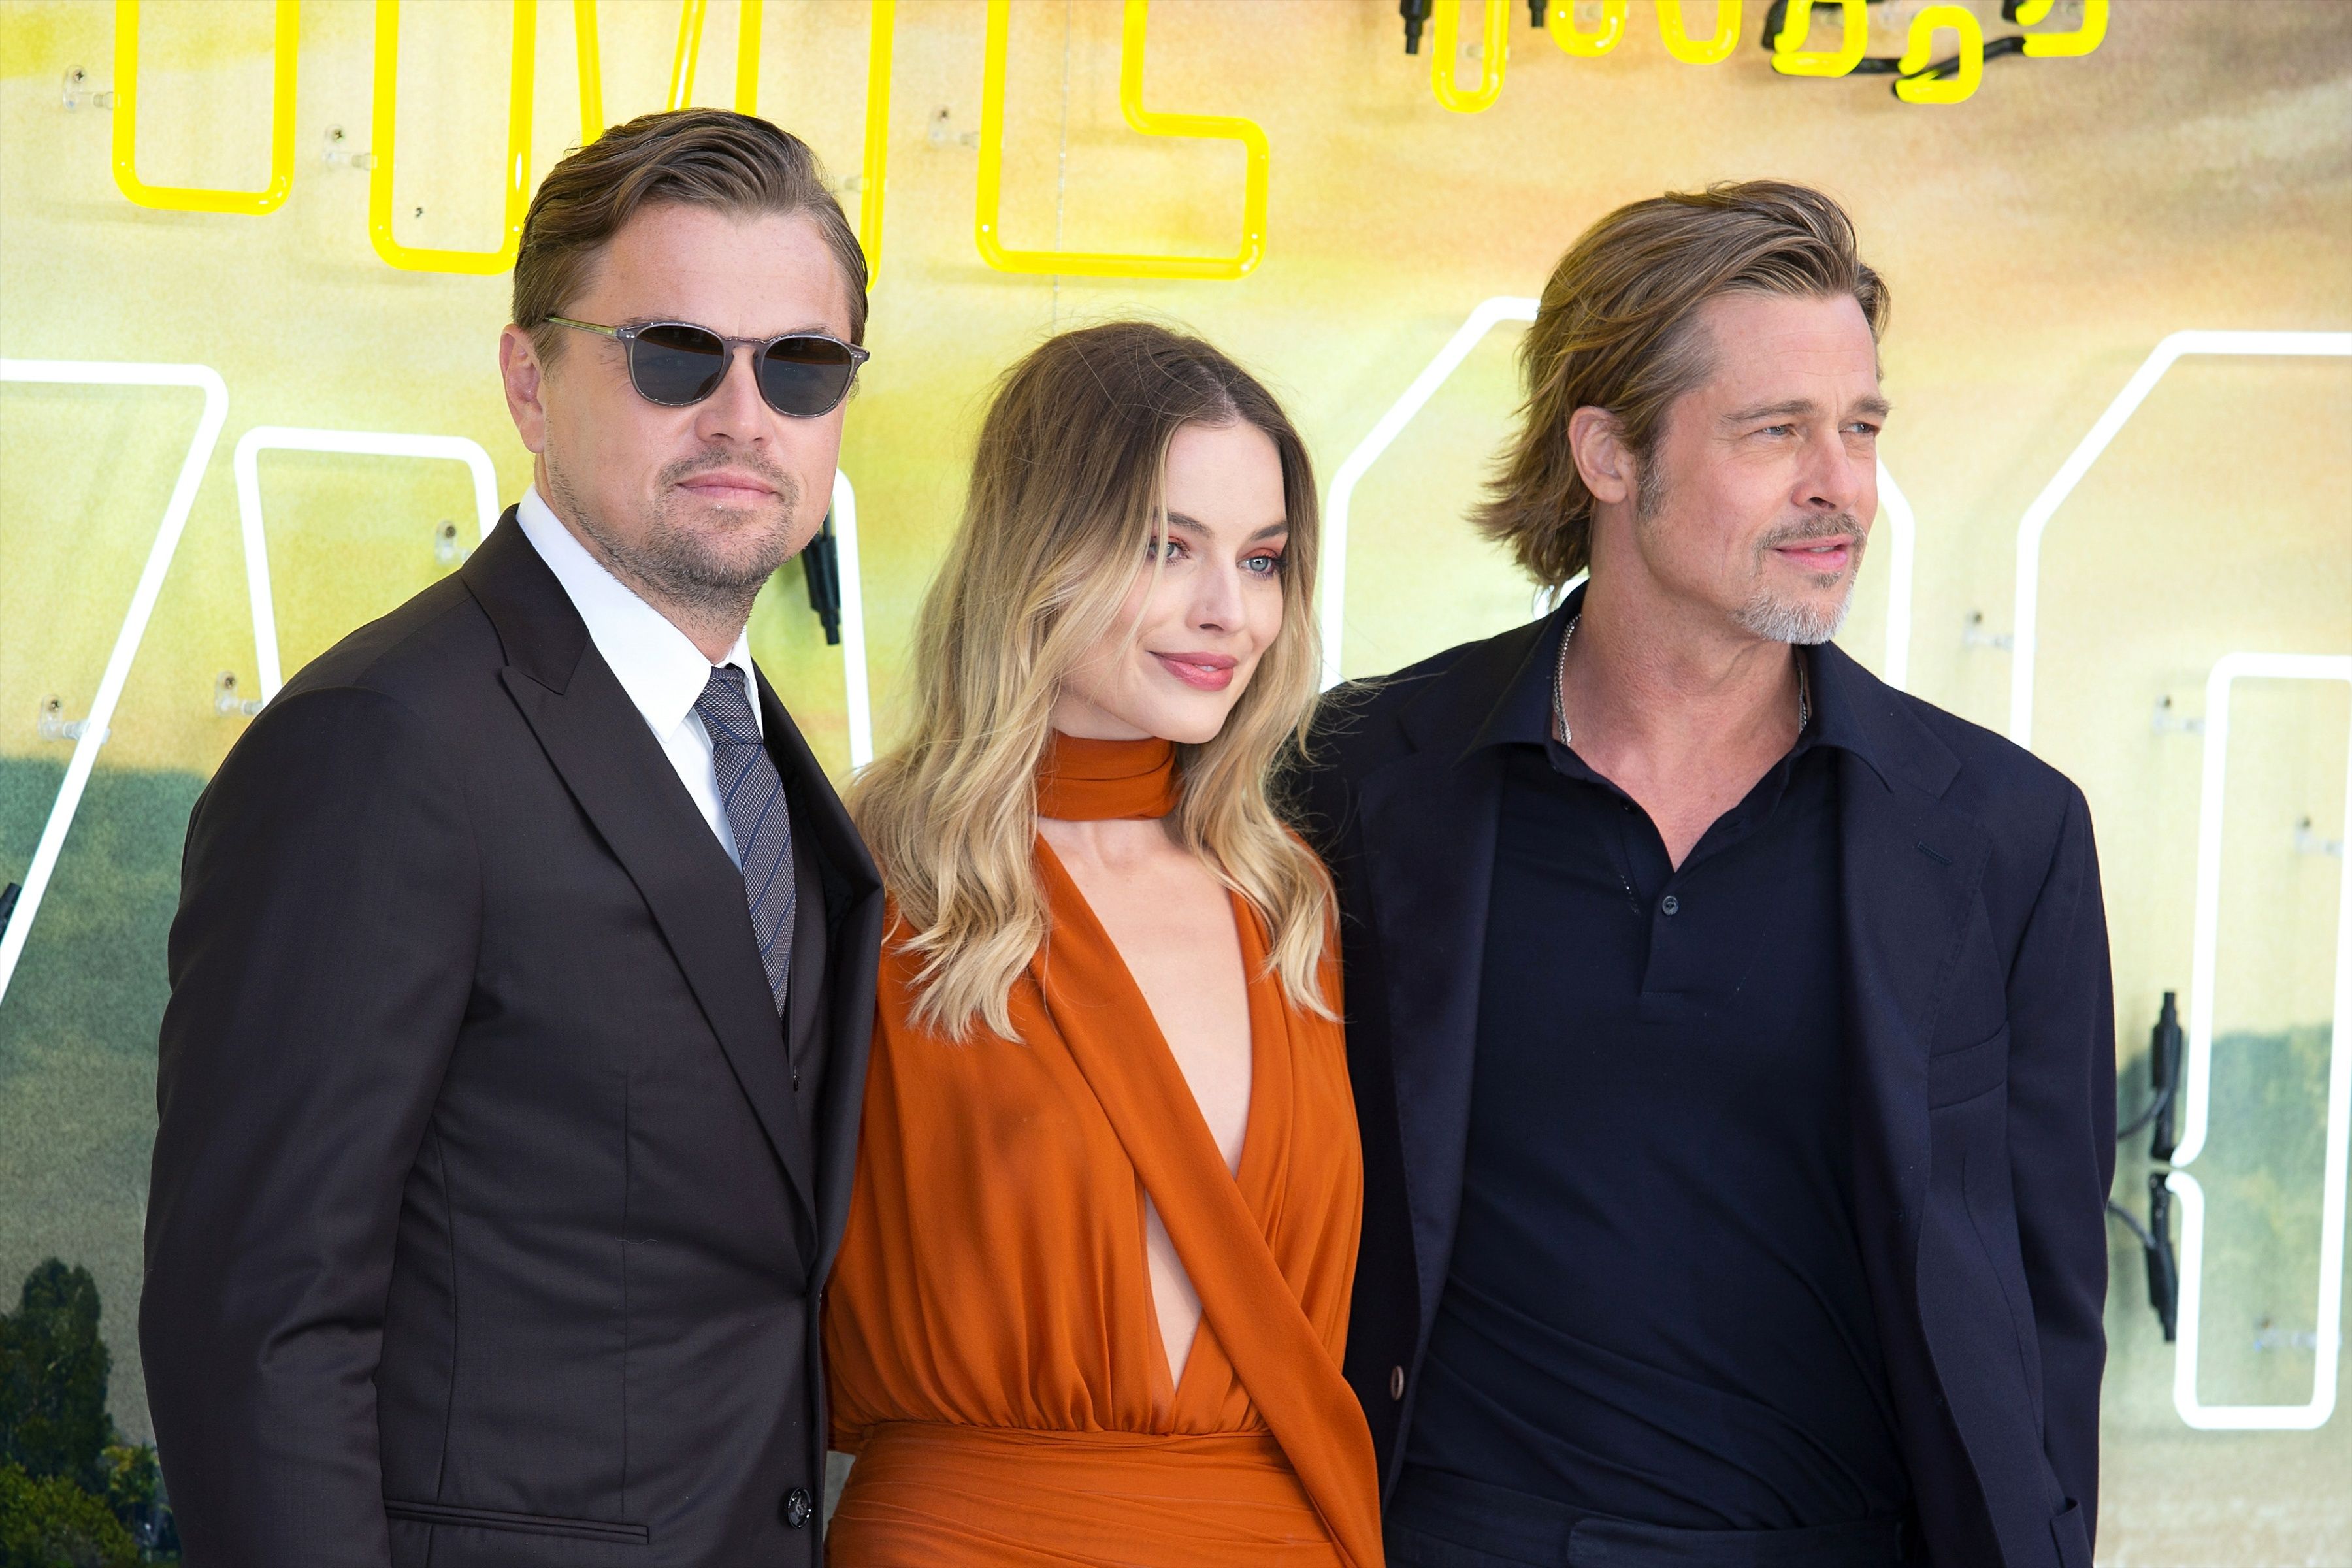 Leonardo DiCaprio, Margot Robbie, and Brad Pitt at the UK Premiere of Once Upon A Time In Hollywood